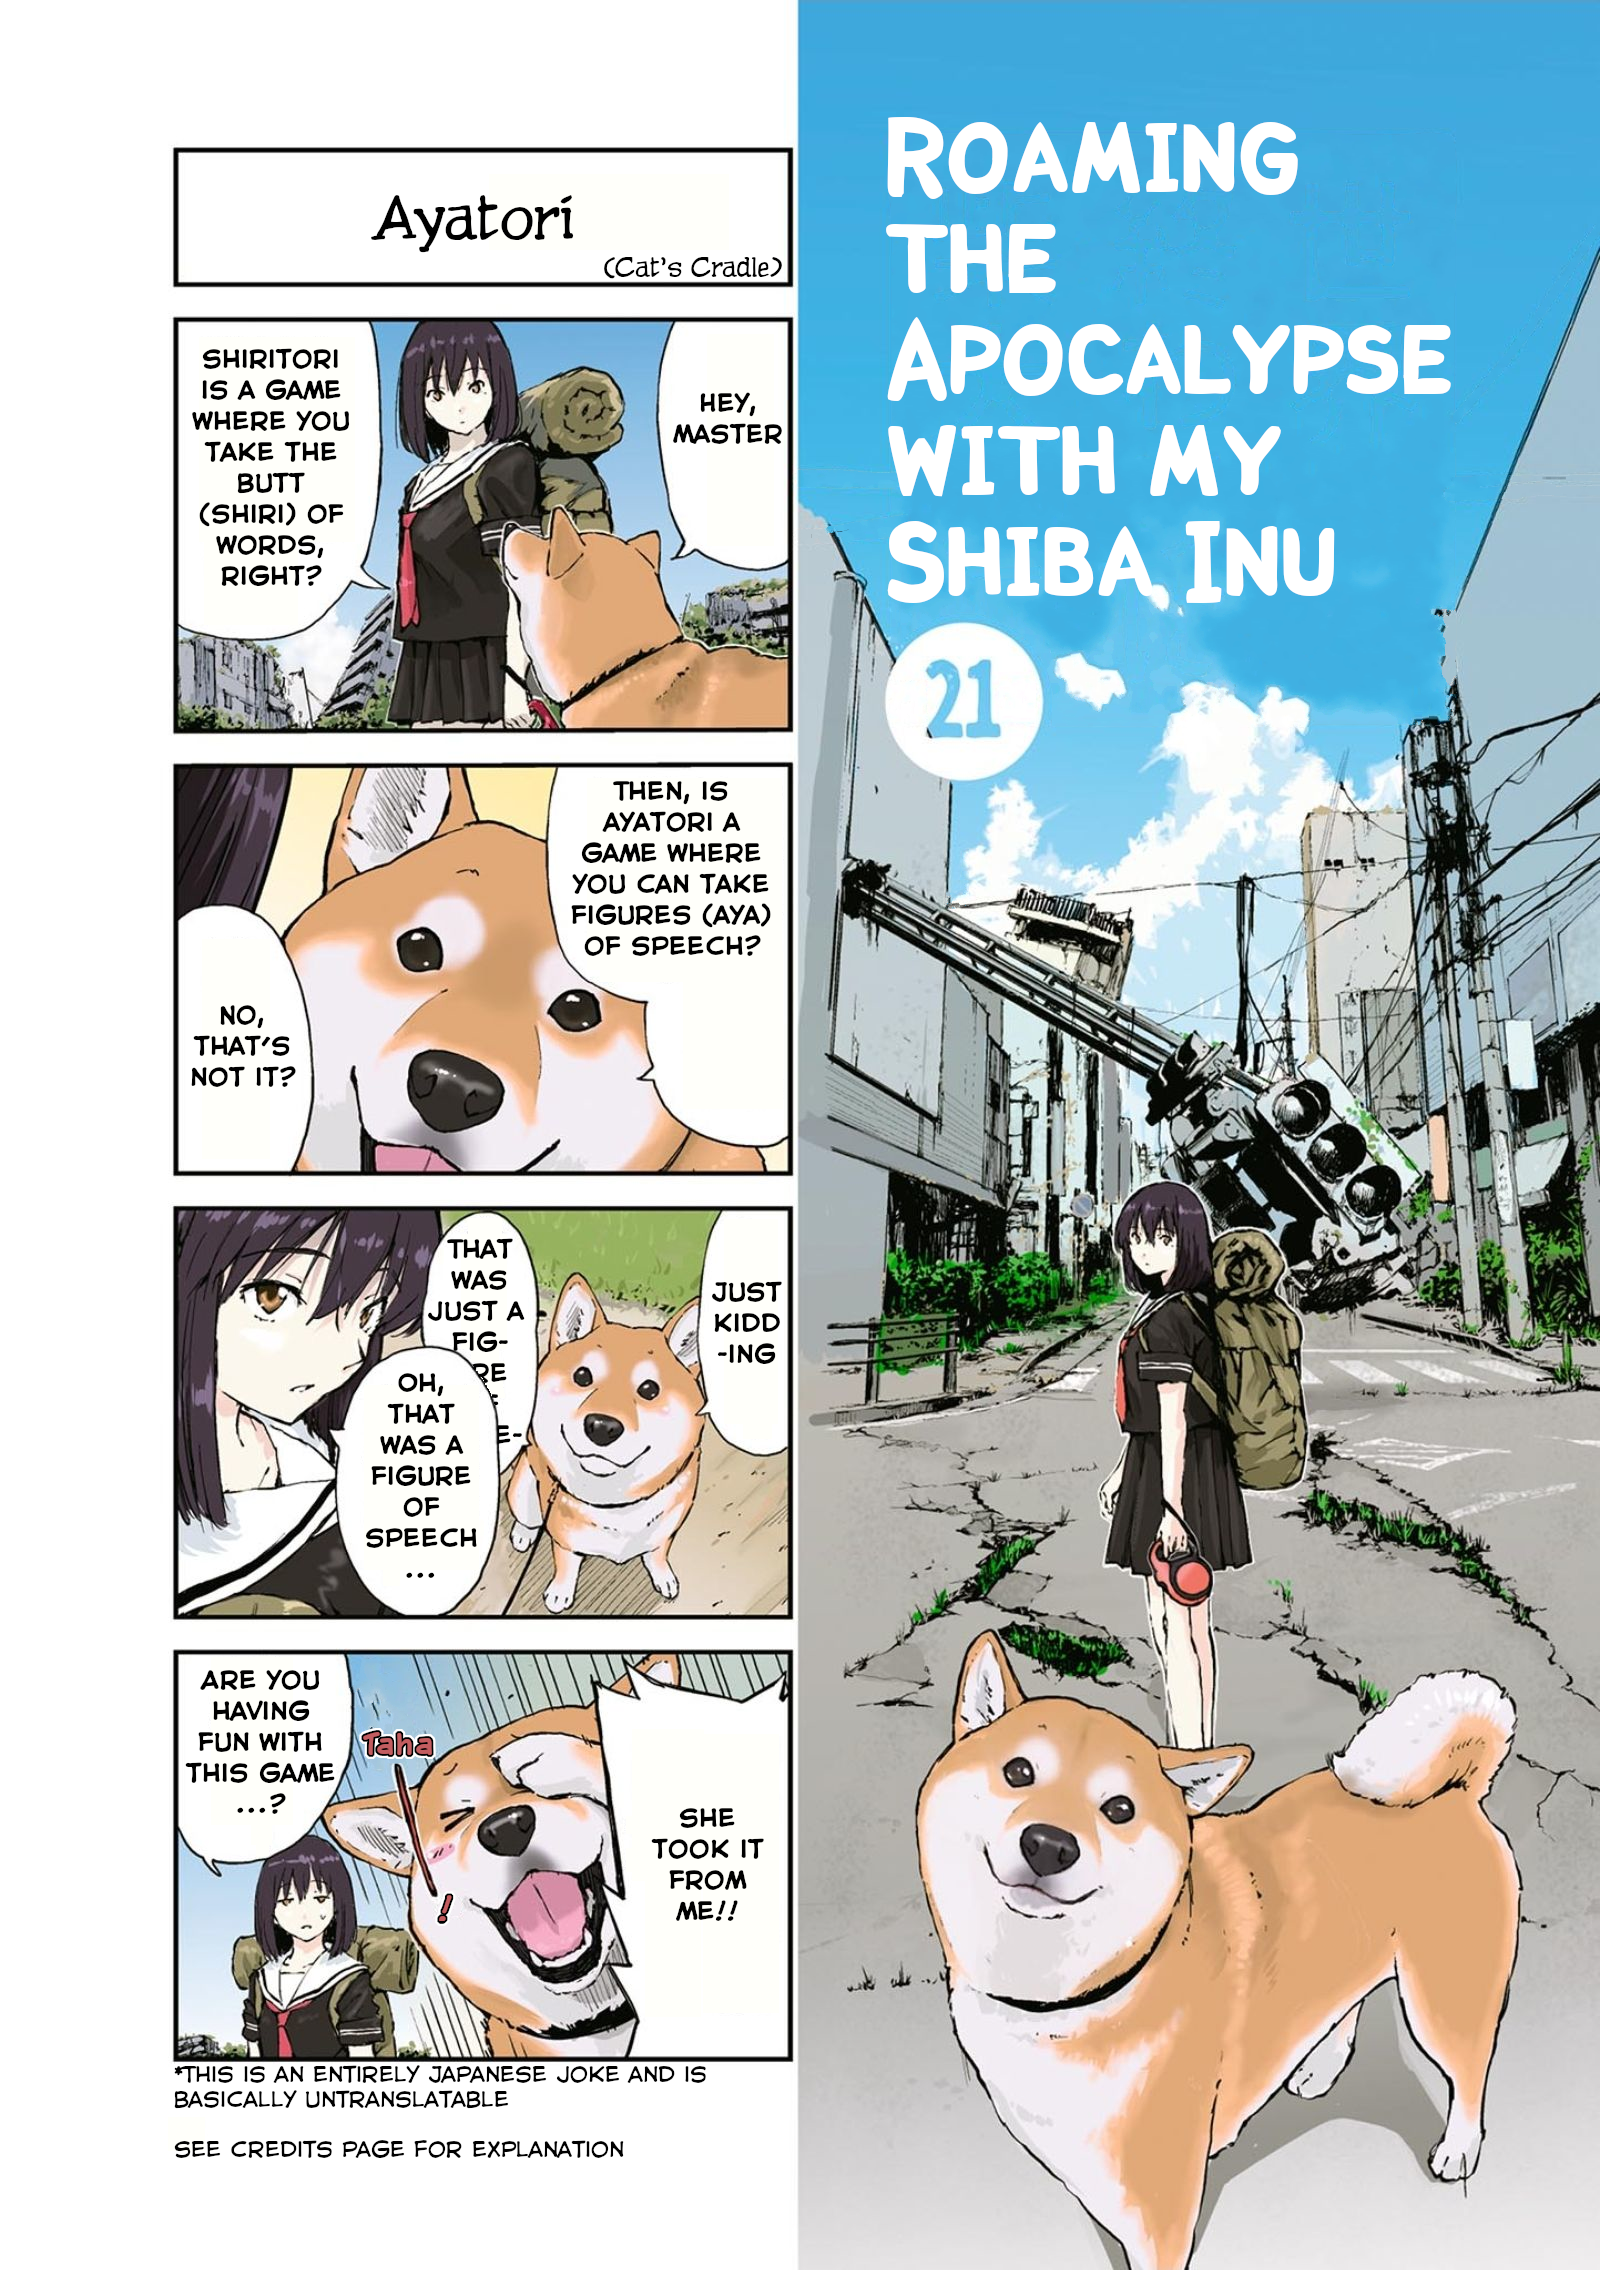 Roaming The Apocalypse With My Shiba Inu - chapter 21 - #1